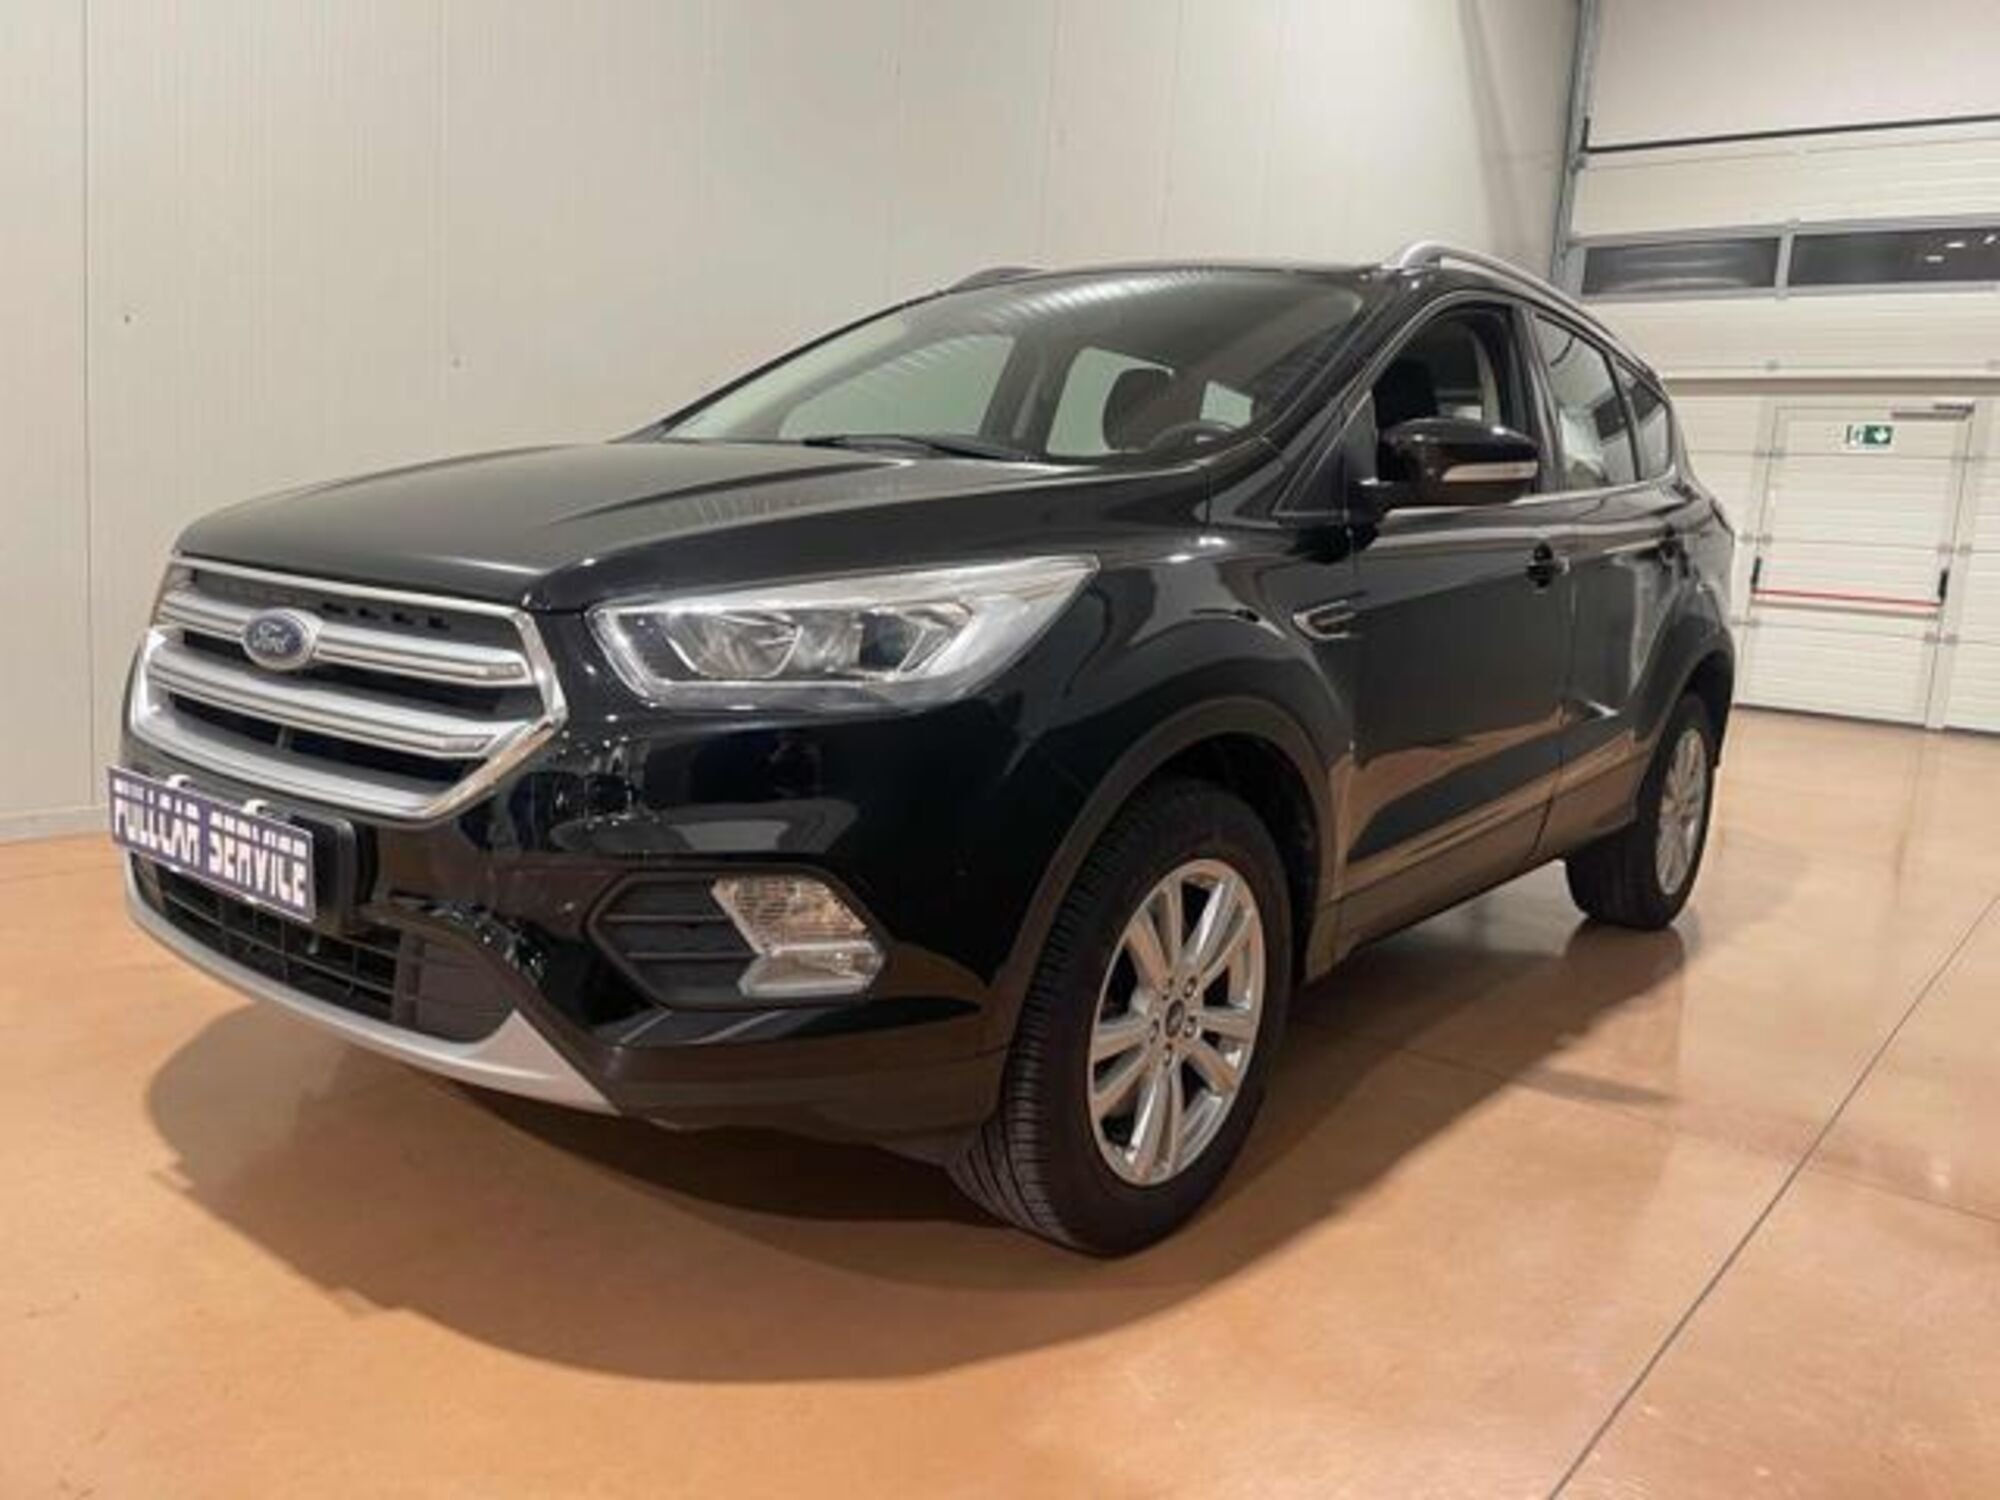 Ford Kuga 2.0 TDCI 120 CV S&S 2WD Business usato